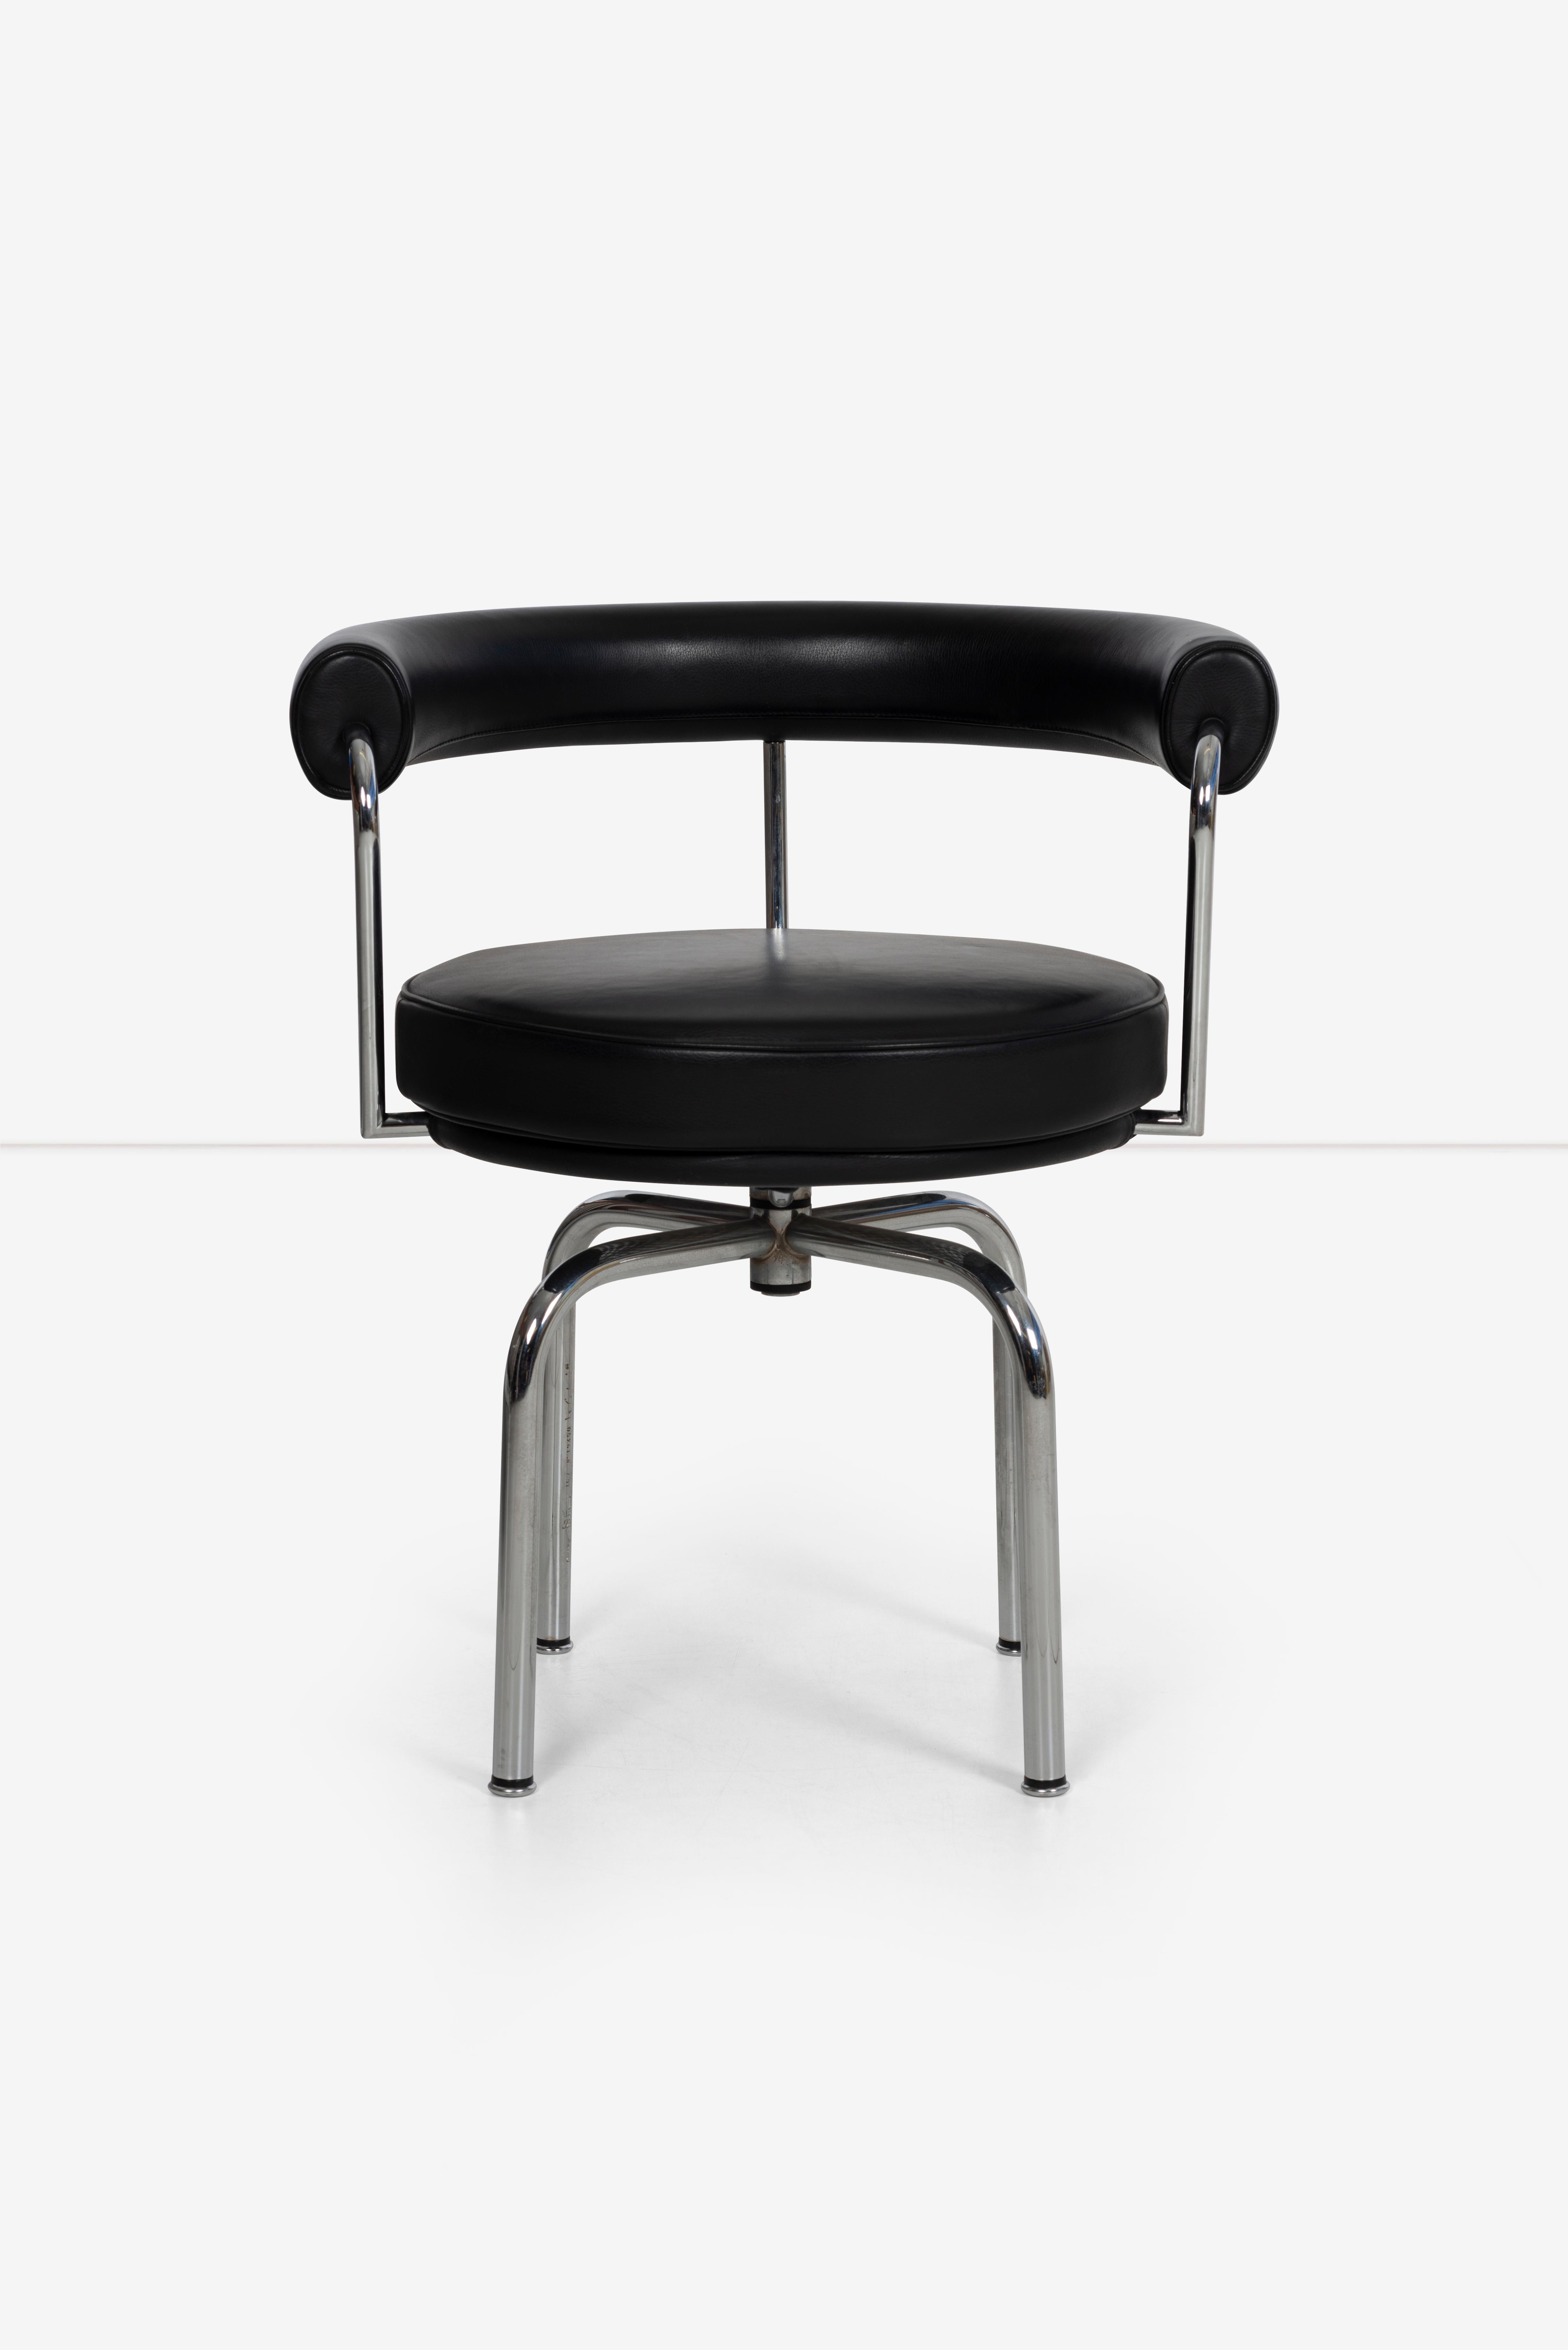 LC7 swivel chair designed by Charloette Perriand. Chrome plated steel and black leather. minor pitting to the base. Originally designed in 1928 for her apartment.